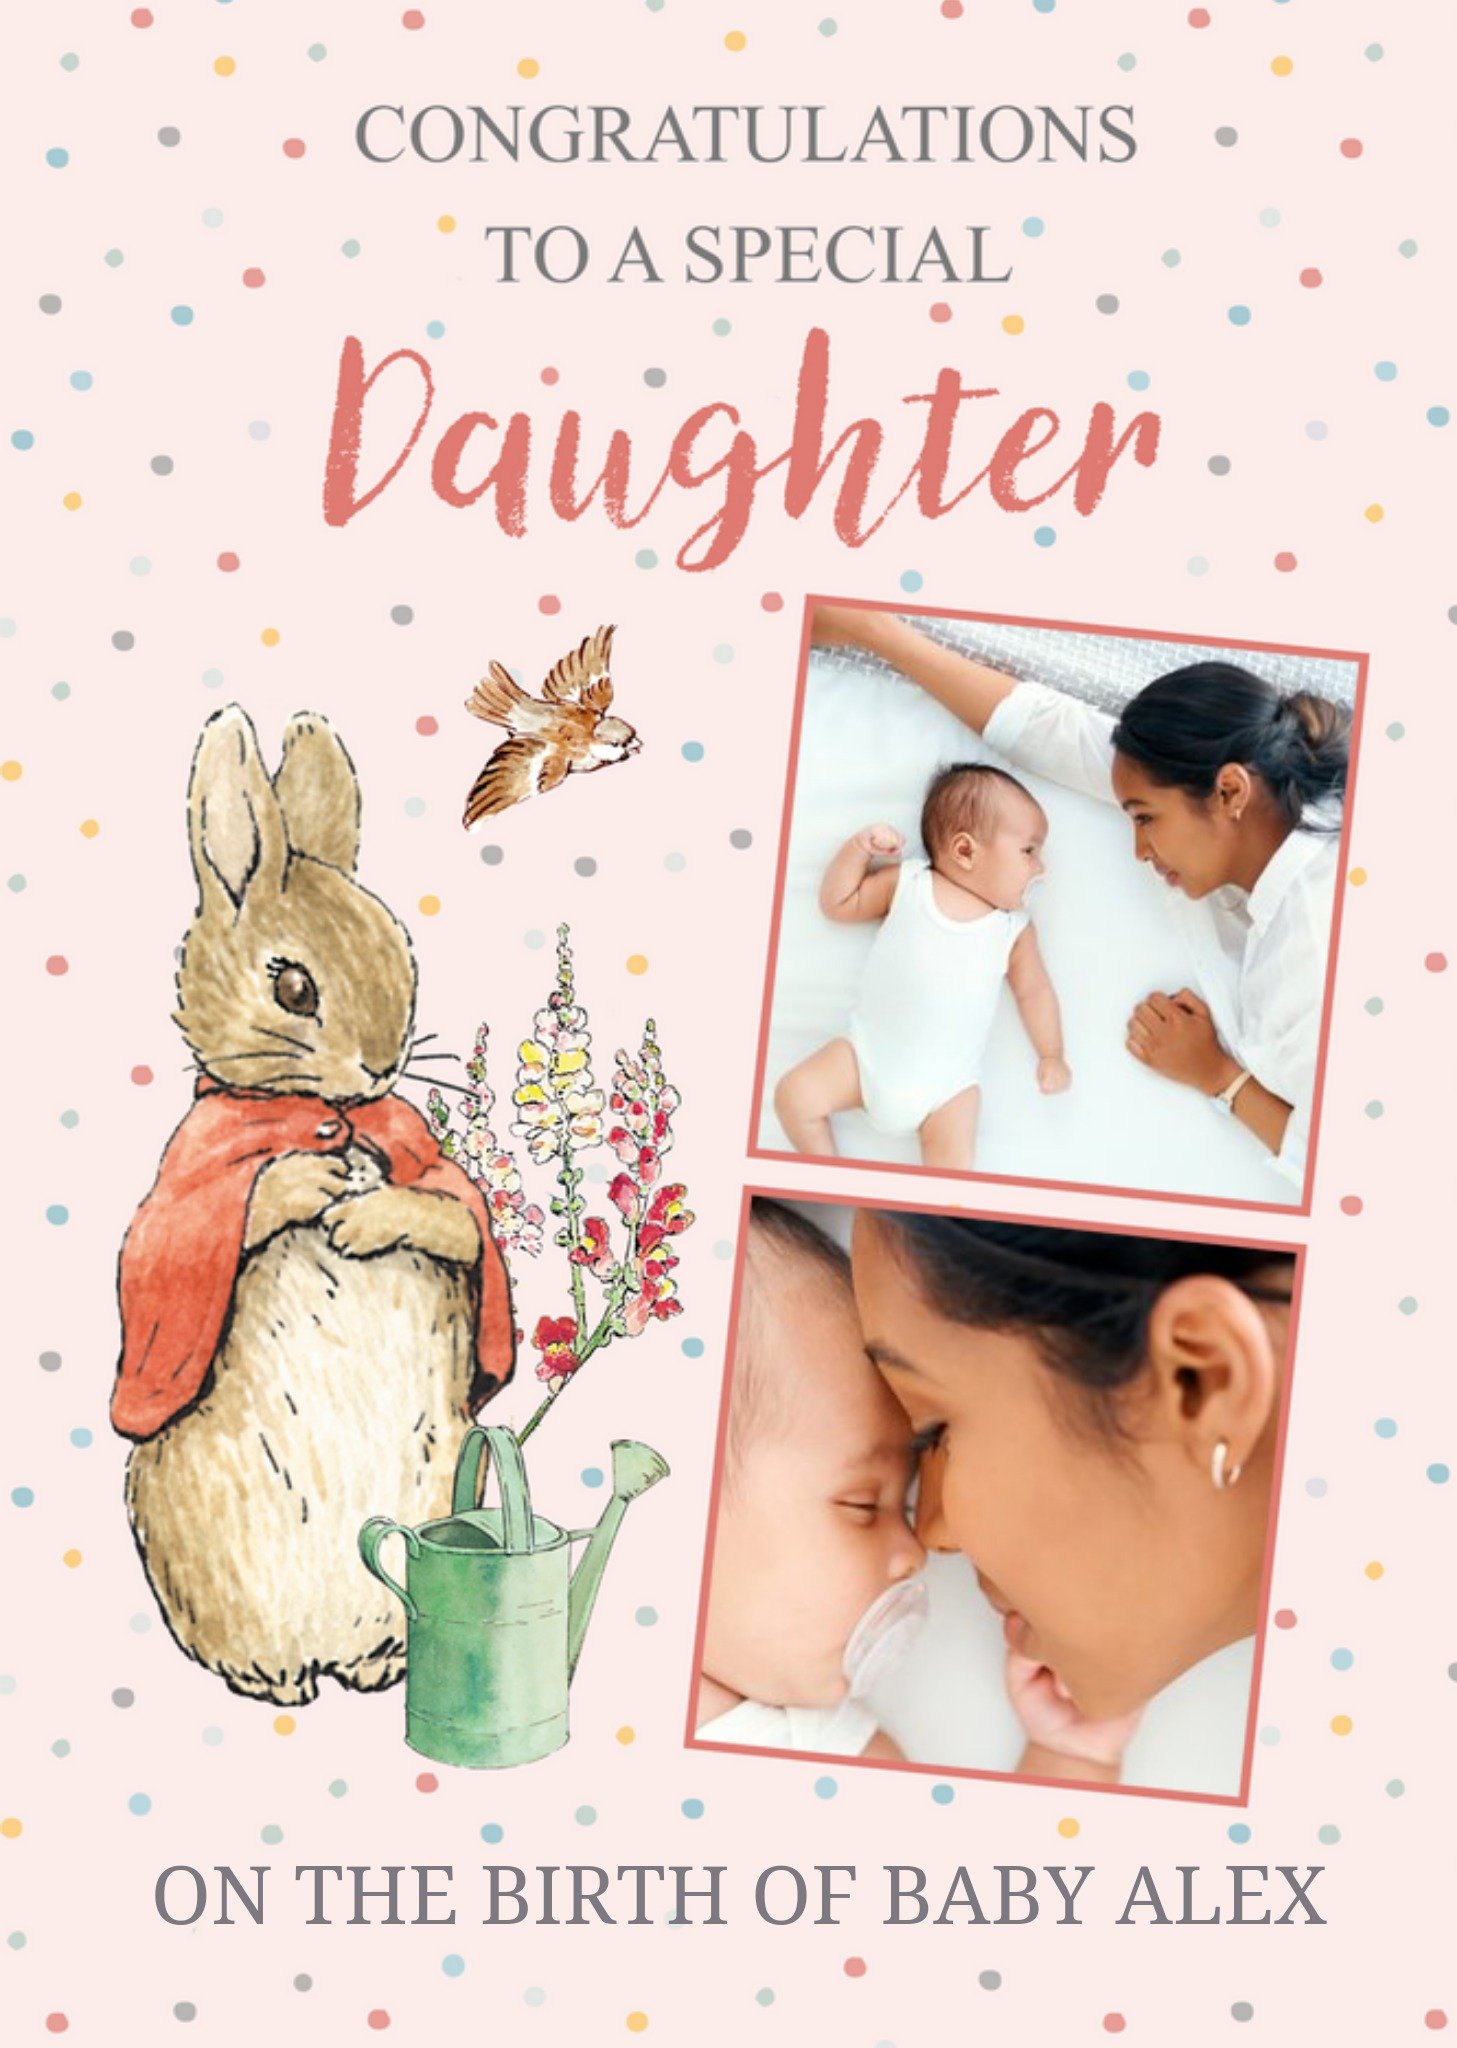 Beatrix Potter Peter Rabbit Congratulations To A Special Daughter Photo Upload New Baby Card Ecard